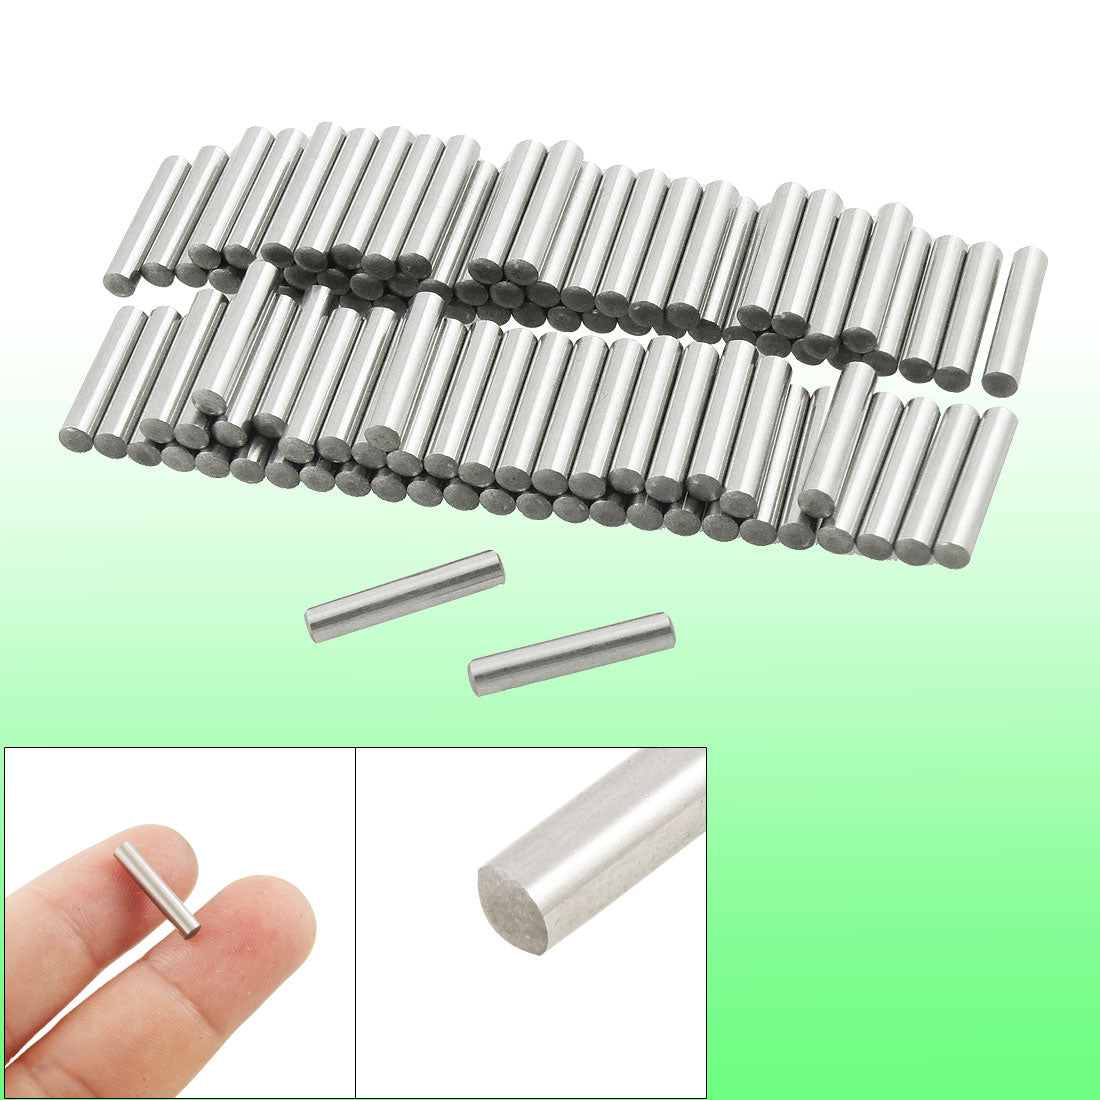 uxcell Uxcell 100 Pcs Stainless Steel 3mm x 15.8mm Dowel Pins Fasten Elements